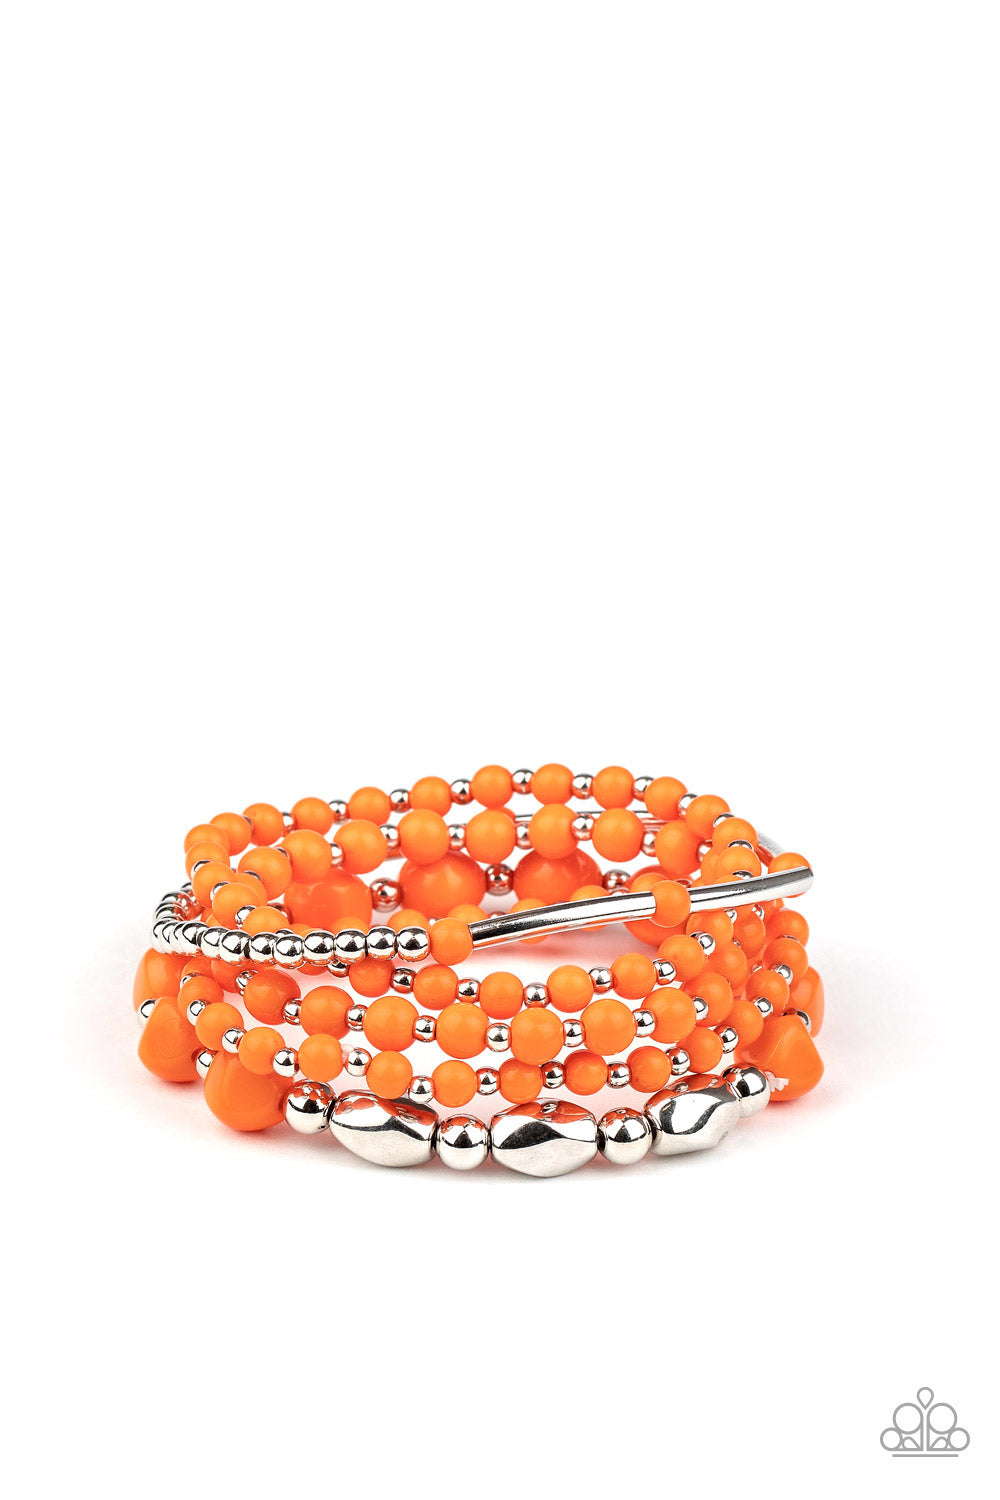 &lt;P&gt;Infused with dainty silver beads, a mismatched collection of refreshing orange and shiny silver beads are threaded along stretchy bands around the wrist for a colorfully layered look.&lt;/P&gt;

&lt;P&gt;&lt;I&gt; Sold as one set of five bracelets.&lt;/I&gt;&lt;/p&gt;

&lt;img src=\&quot;https://d9b54x484lq62.cloudfront.net/paparazzi/shopping/images/517_tag150x115_1.png\&quot; alt=\&quot;New Kit\&quot; align=\&quot;middle\&quot; height=\&quot;50\&quot; width=\&quot;50\&quot;/&gt;